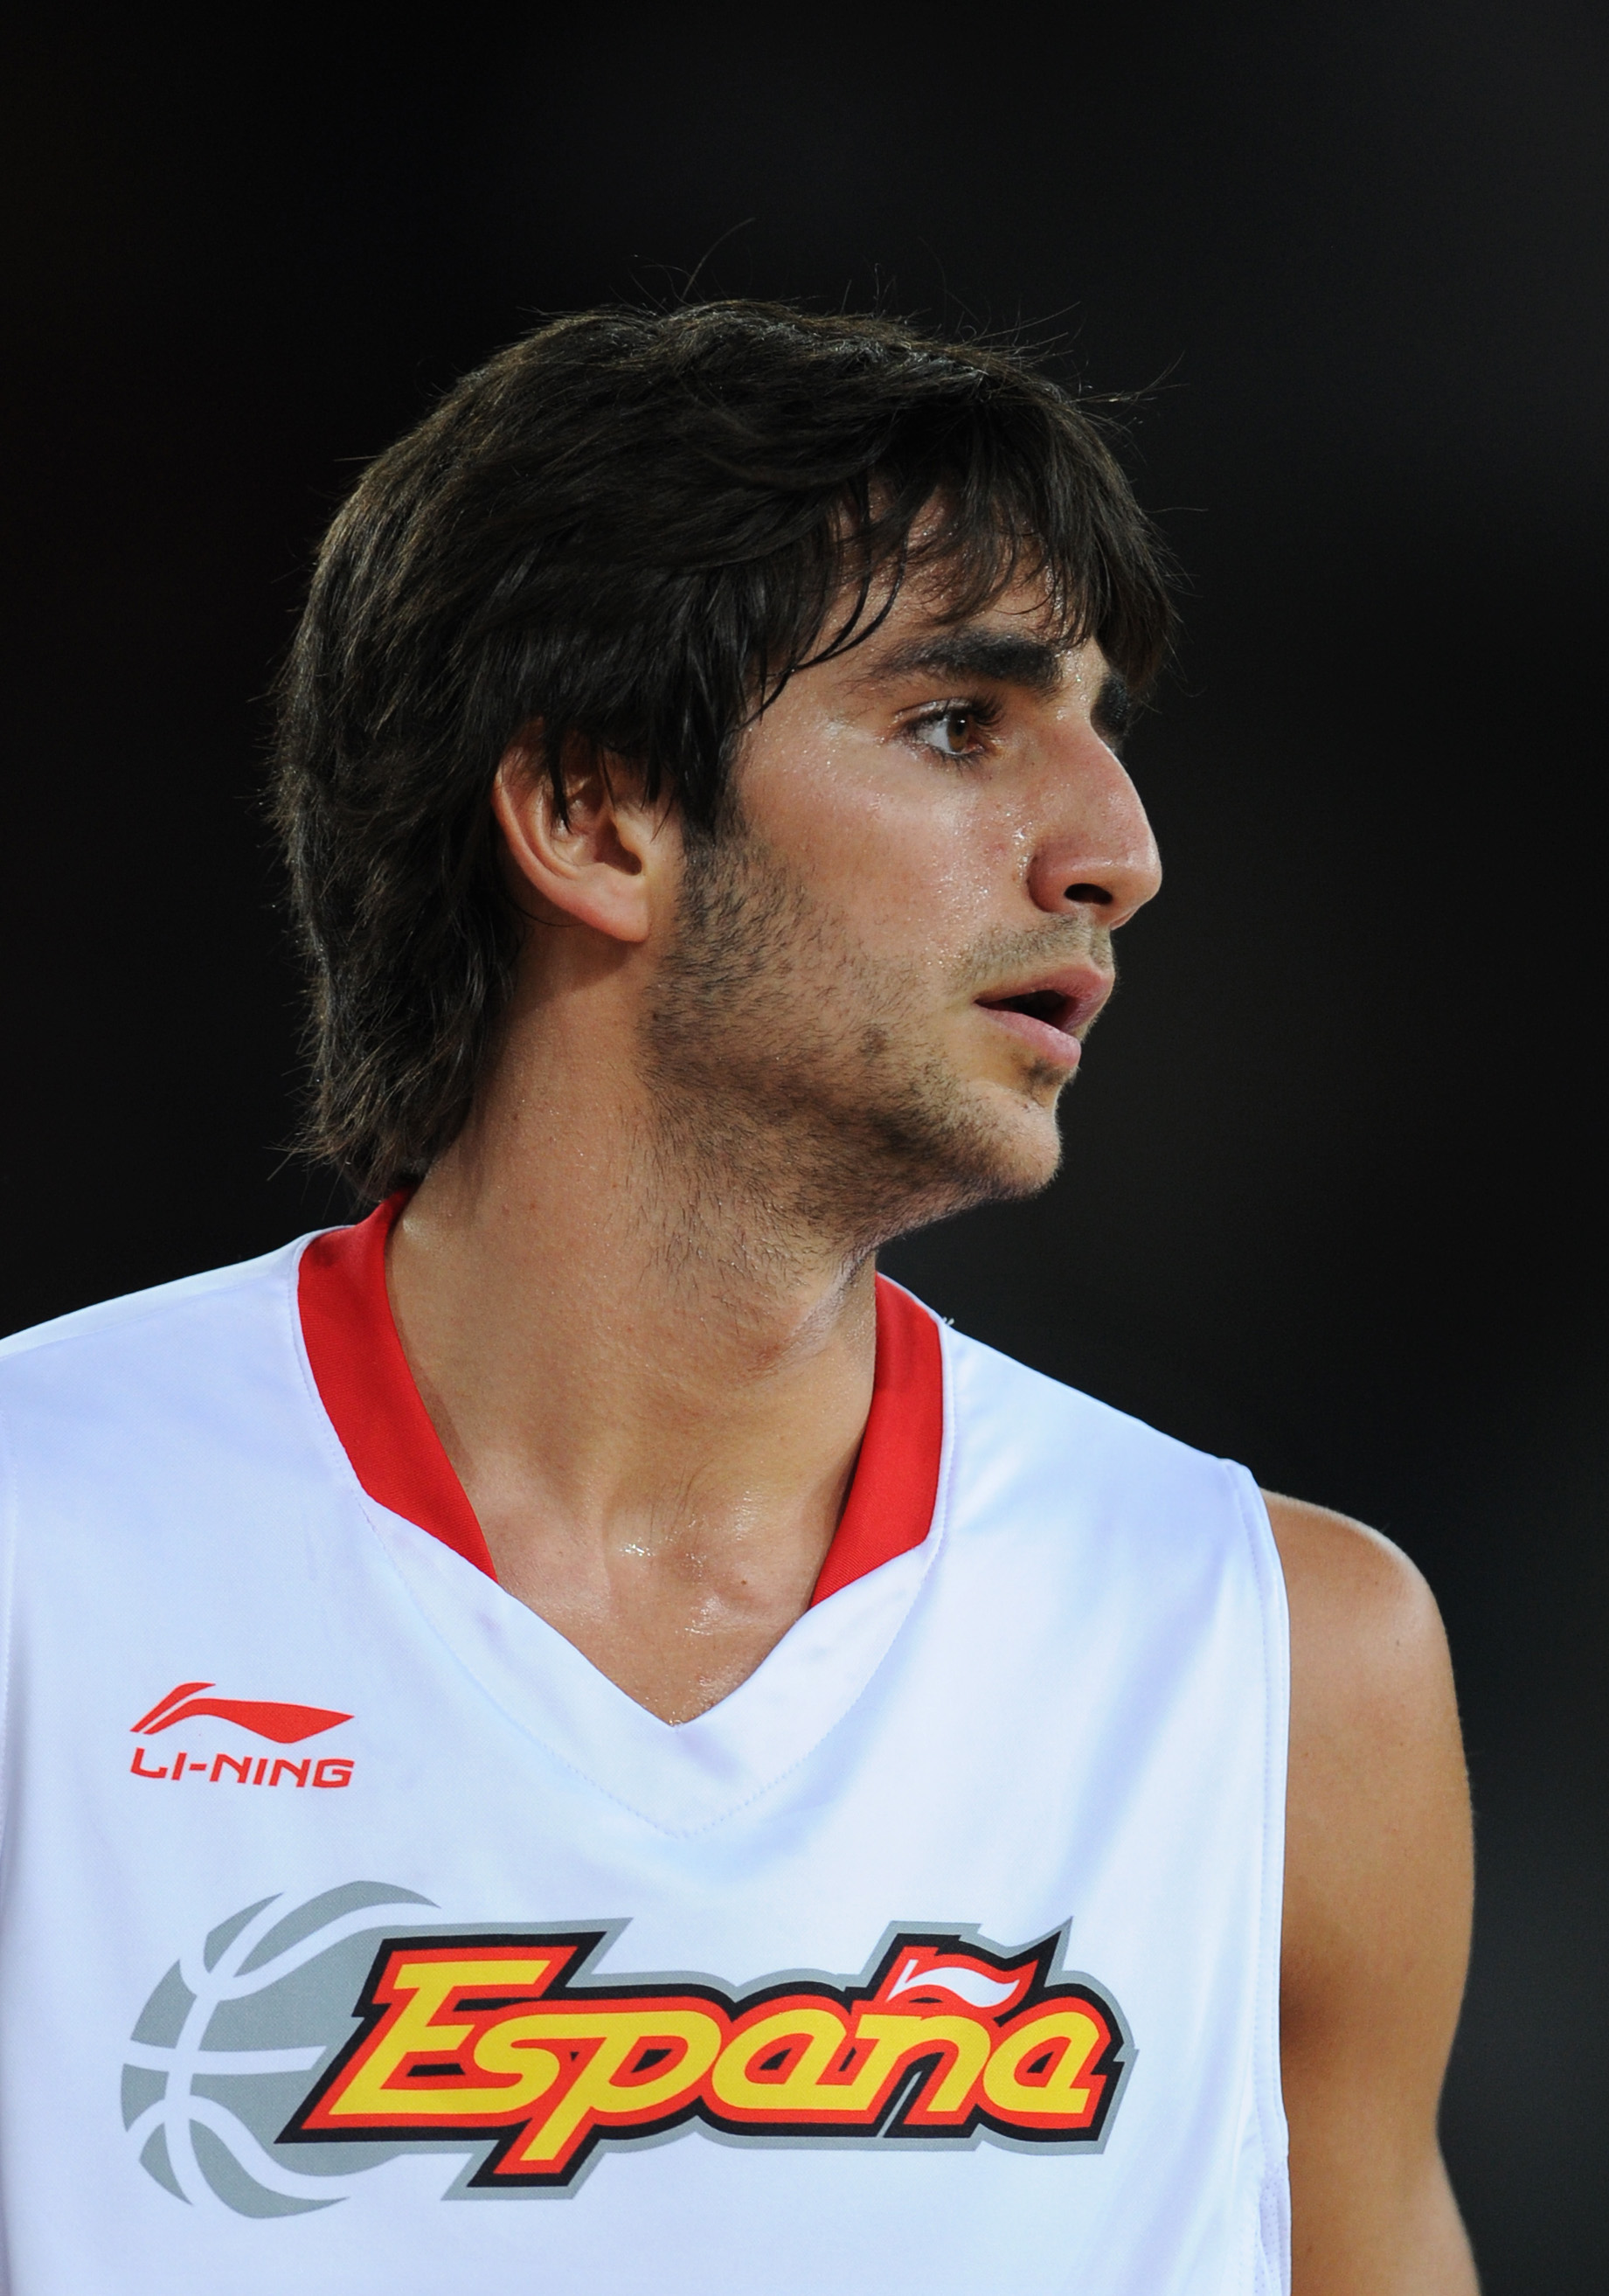 MADRID, SPAIN - AUGUST 22:  Ricky Rubio of Spain watches on during a friendly basketball game between Spain and the USA at La Caja Magica on August 22, 2010 in Madrid, Spain.  (Photo by Jasper Juinen/Getty Images)